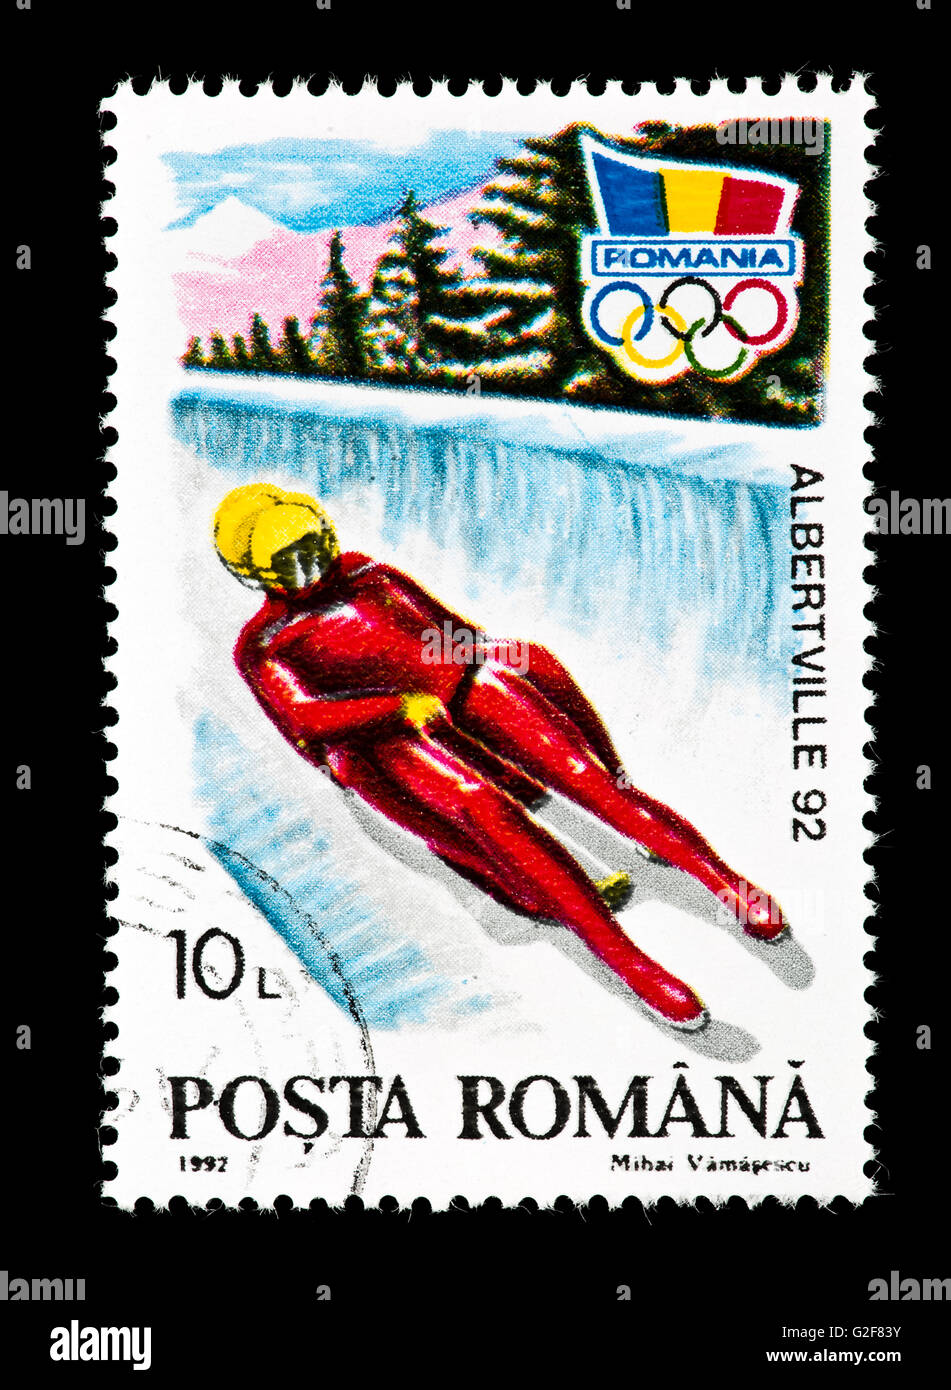 Postage stamp from Romania depicting a luger on a track, issued for the 1992 Winter Olympic Games in Albertville, France. Stock Photo